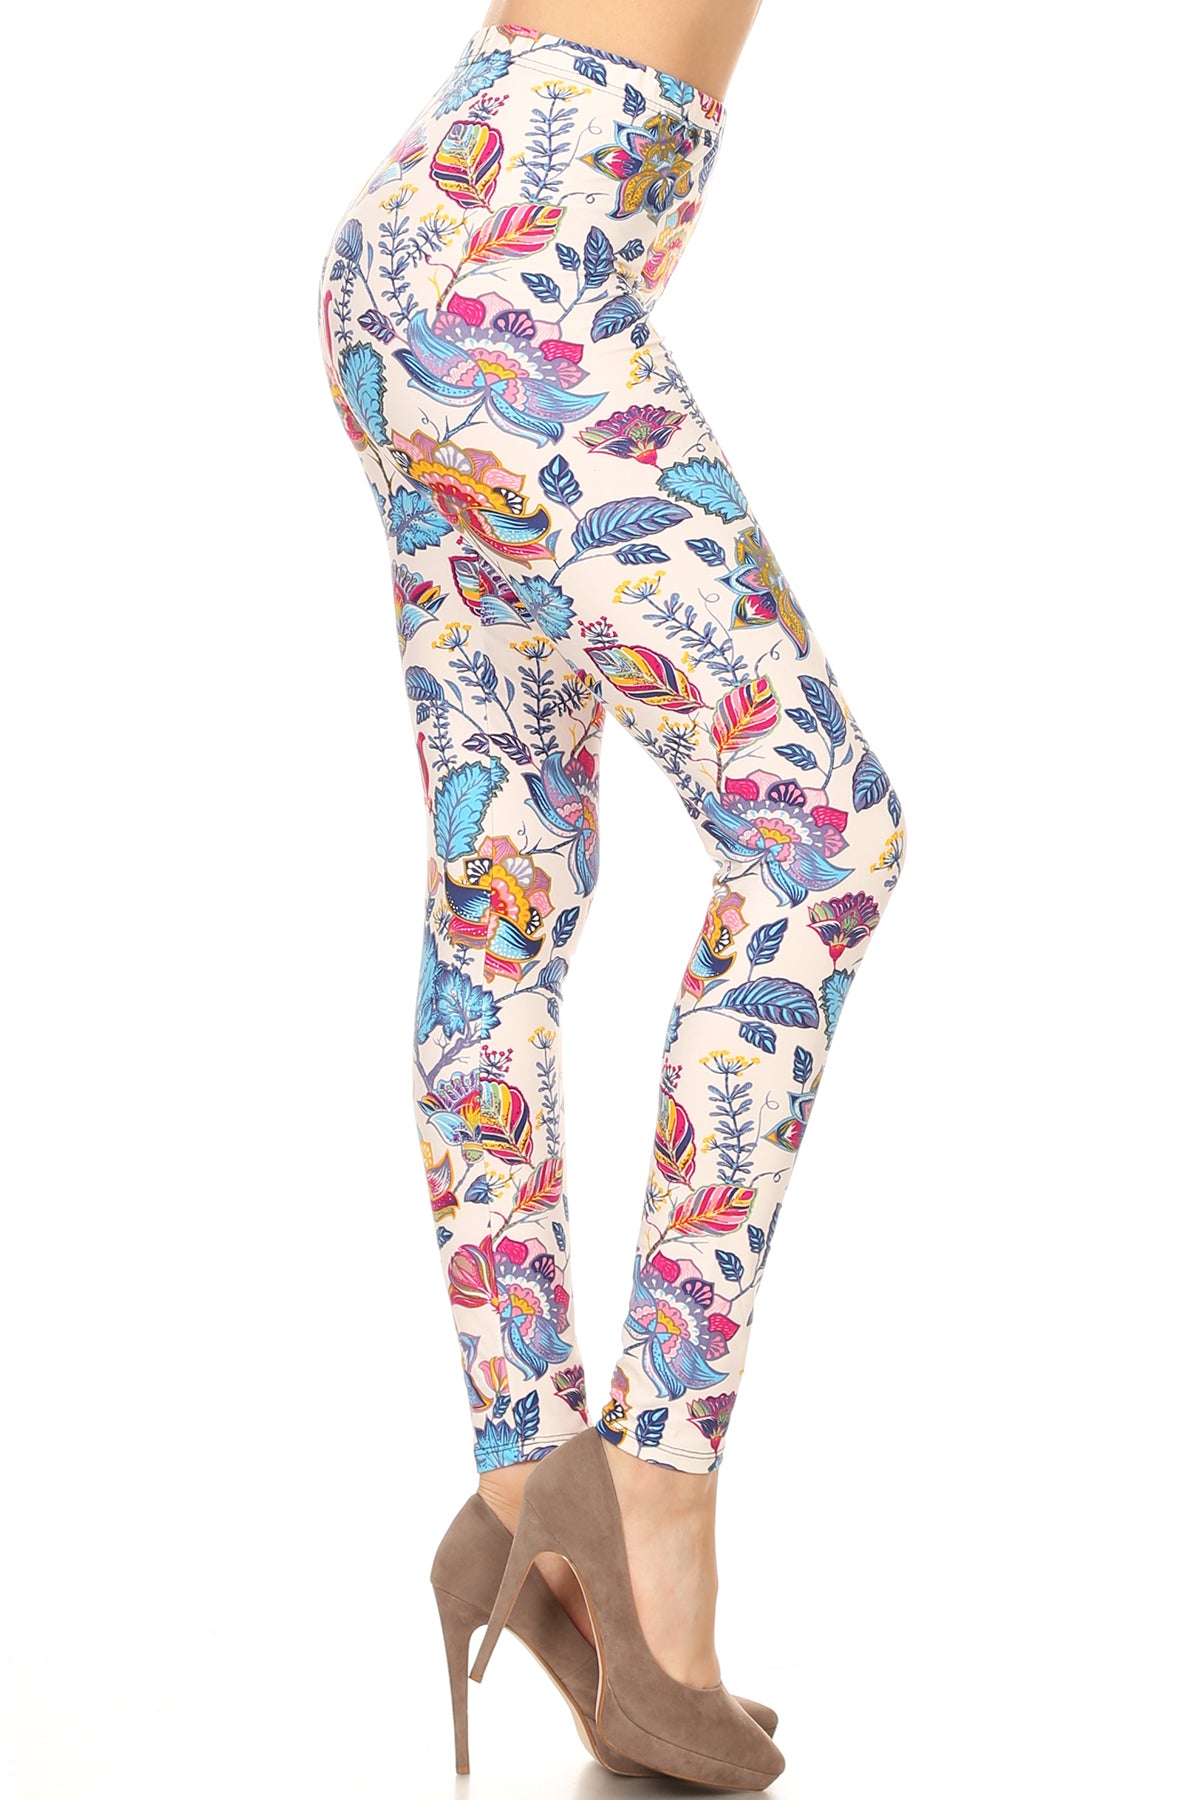 Floral Printed Lined Knit Legging With Elastic Waistband king-general-store-5710.myshopify.com